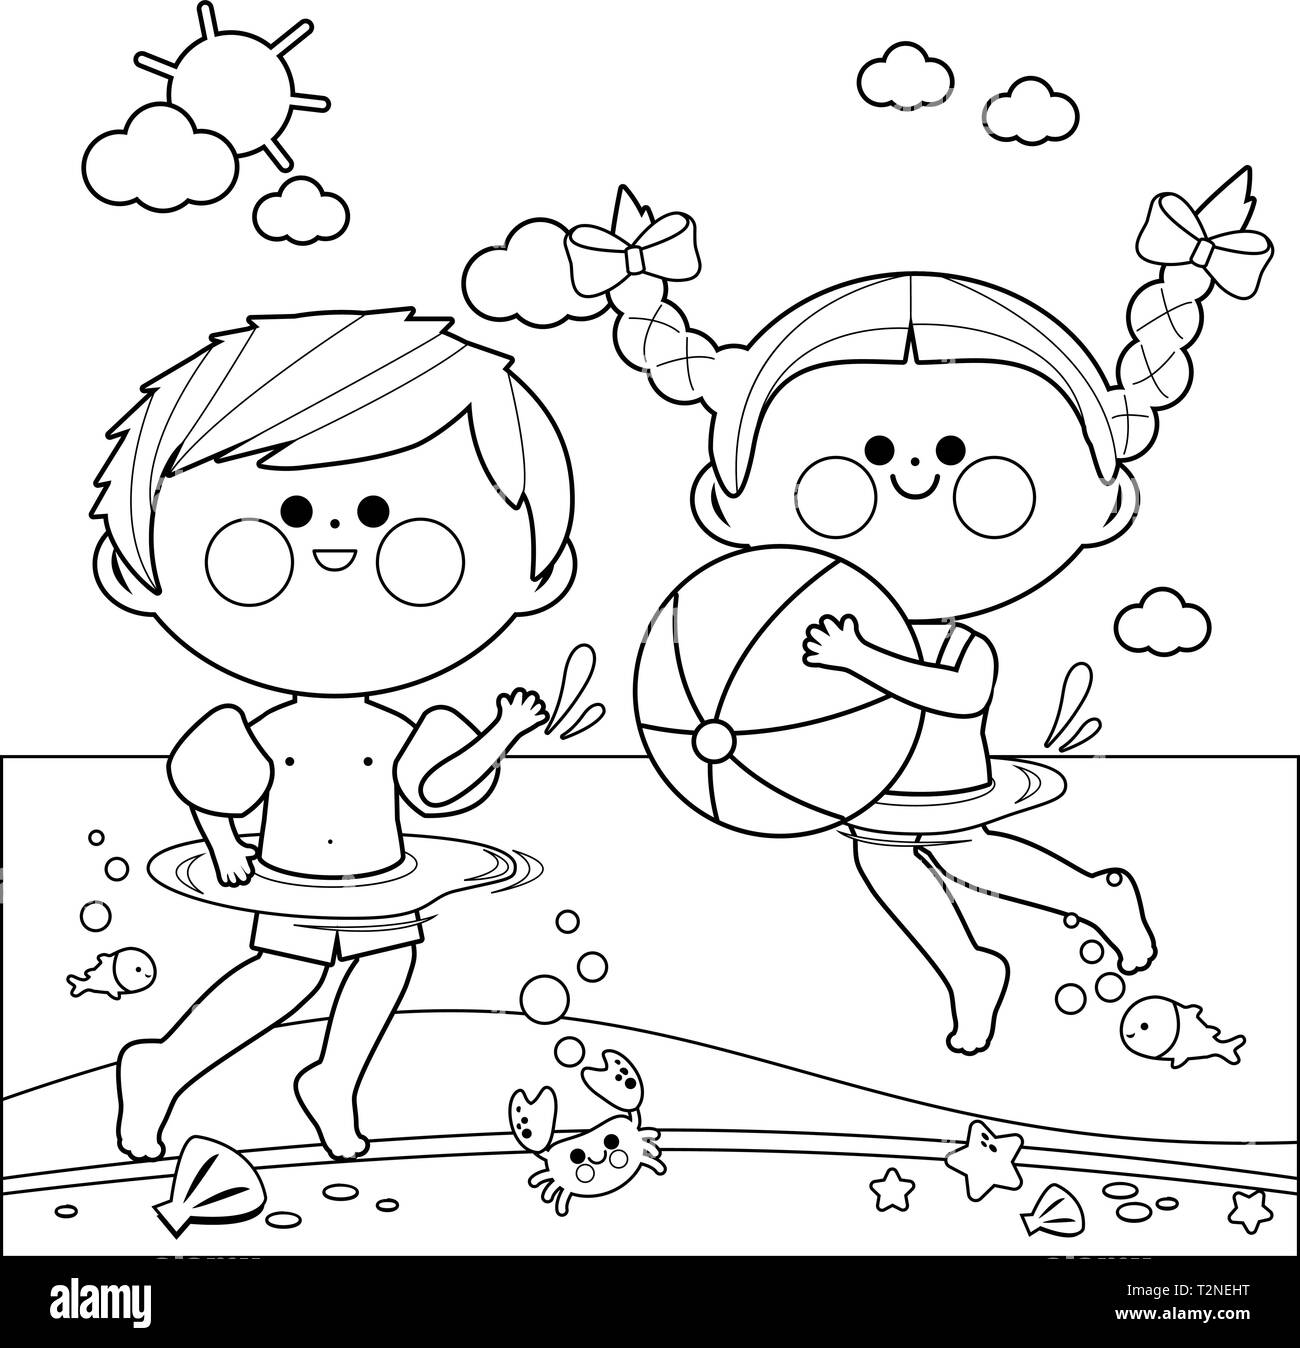 Children swimming in the sea. Black and white coloring book page